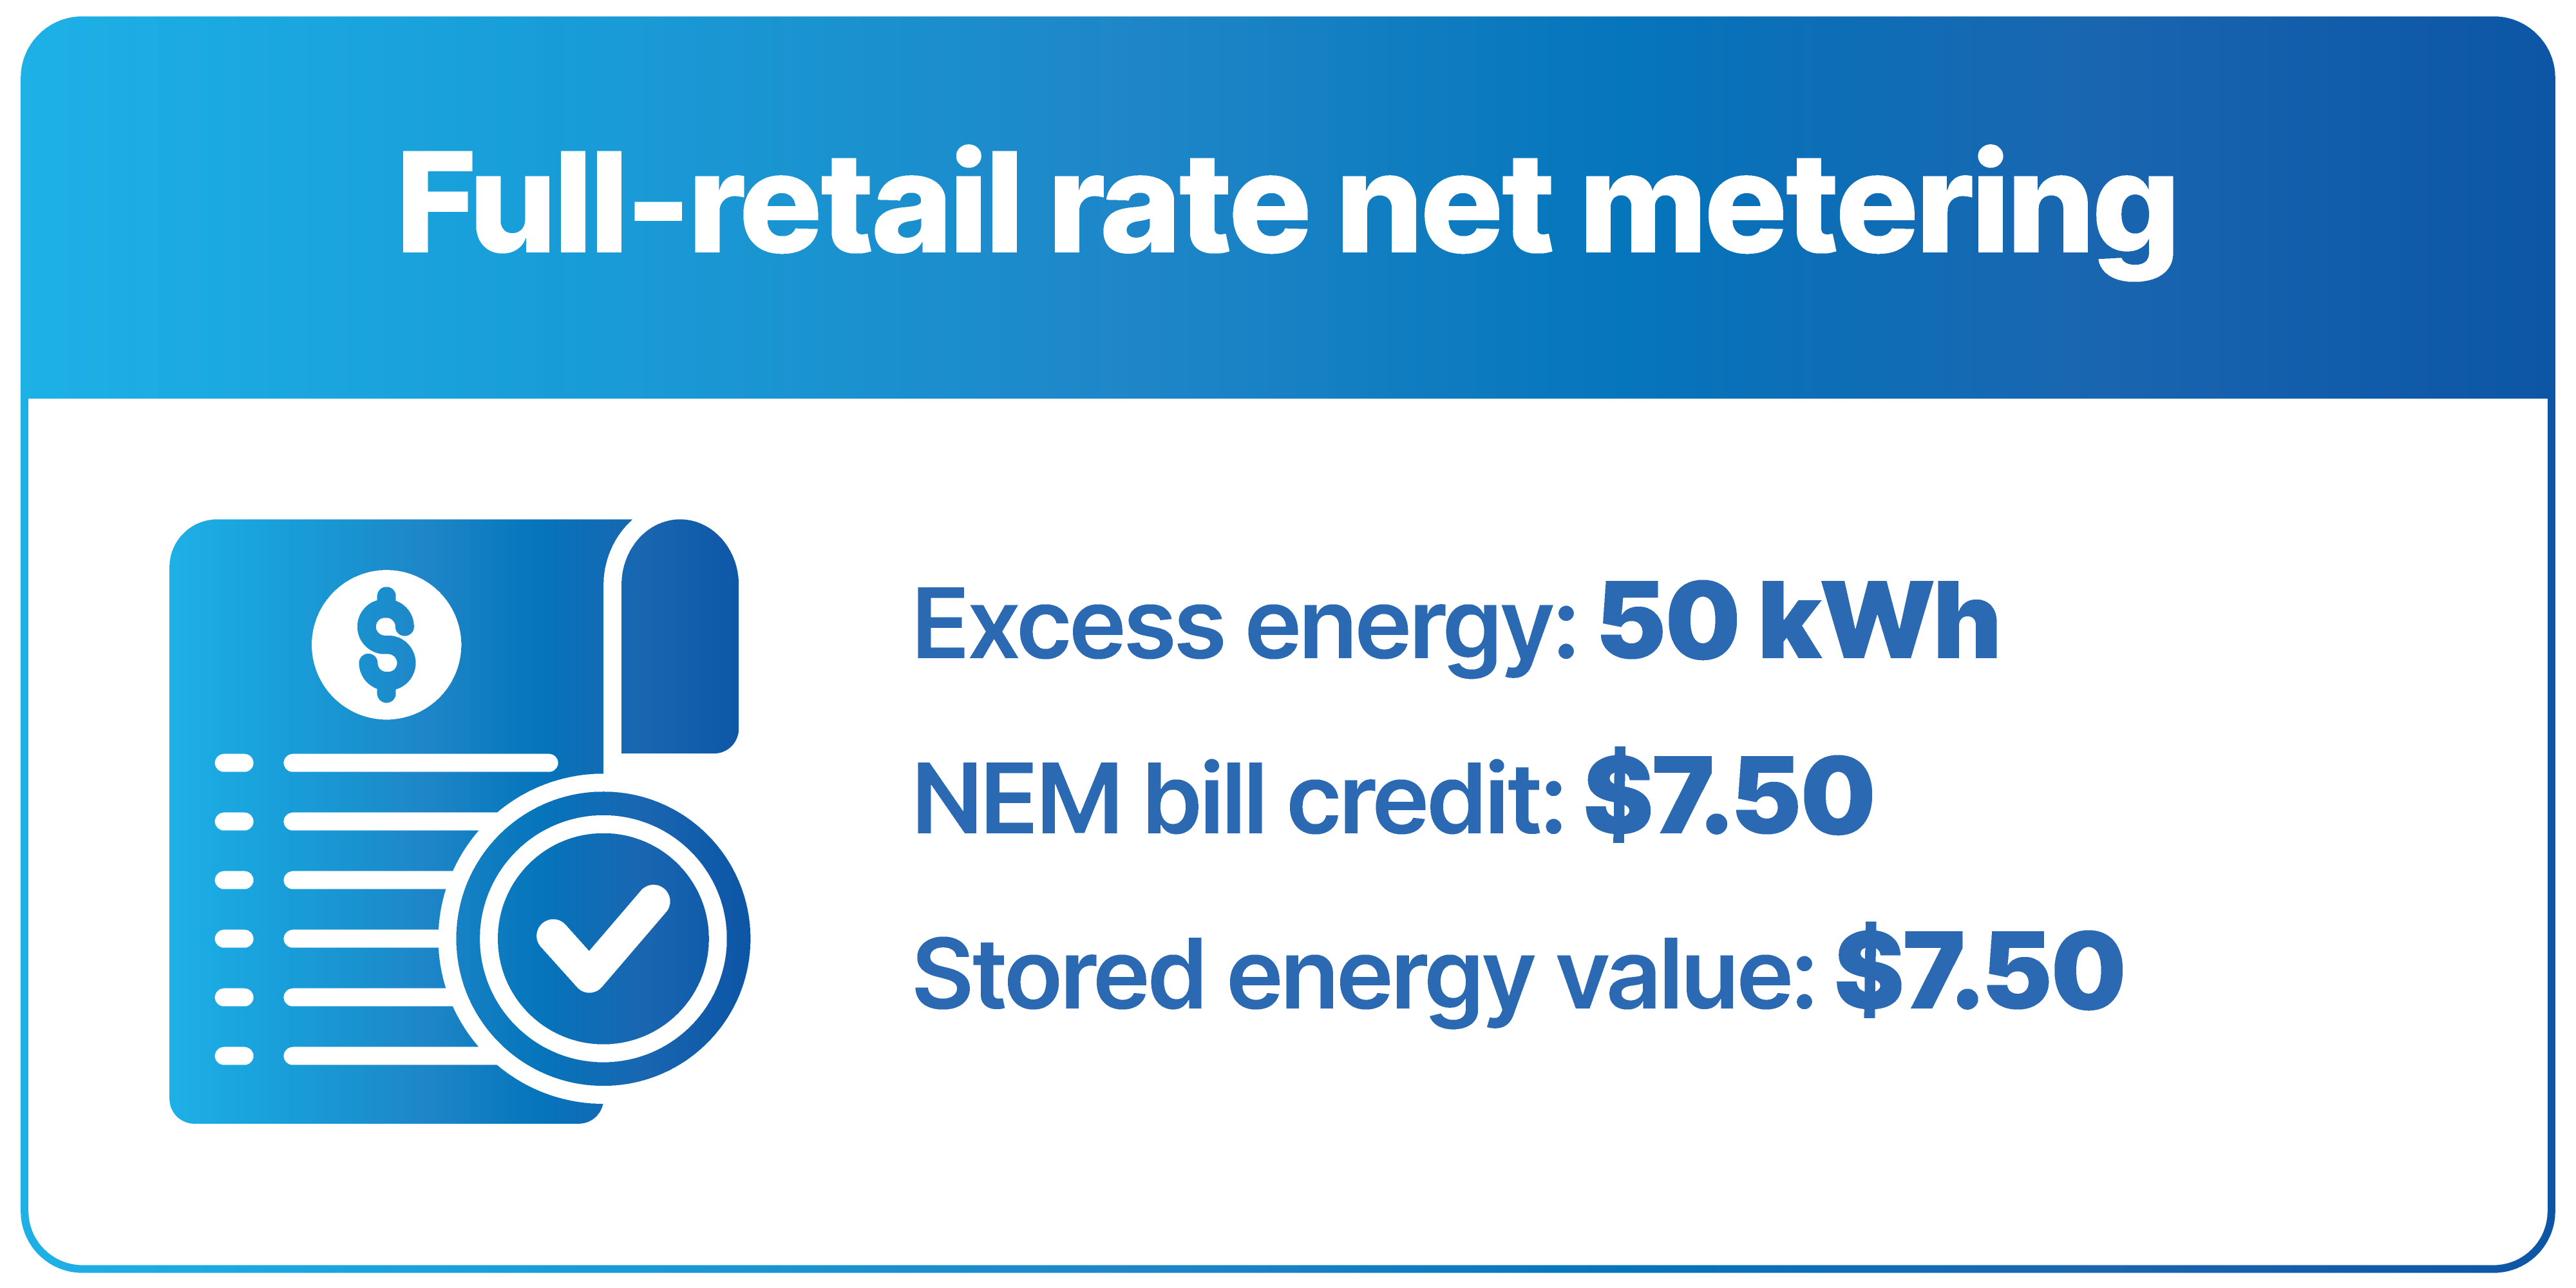 In this example, 50 kWh of energy sold to the utility through full retail net metering would be worth $7.50, 50 kWh of stored energy would also be worth $7.50.